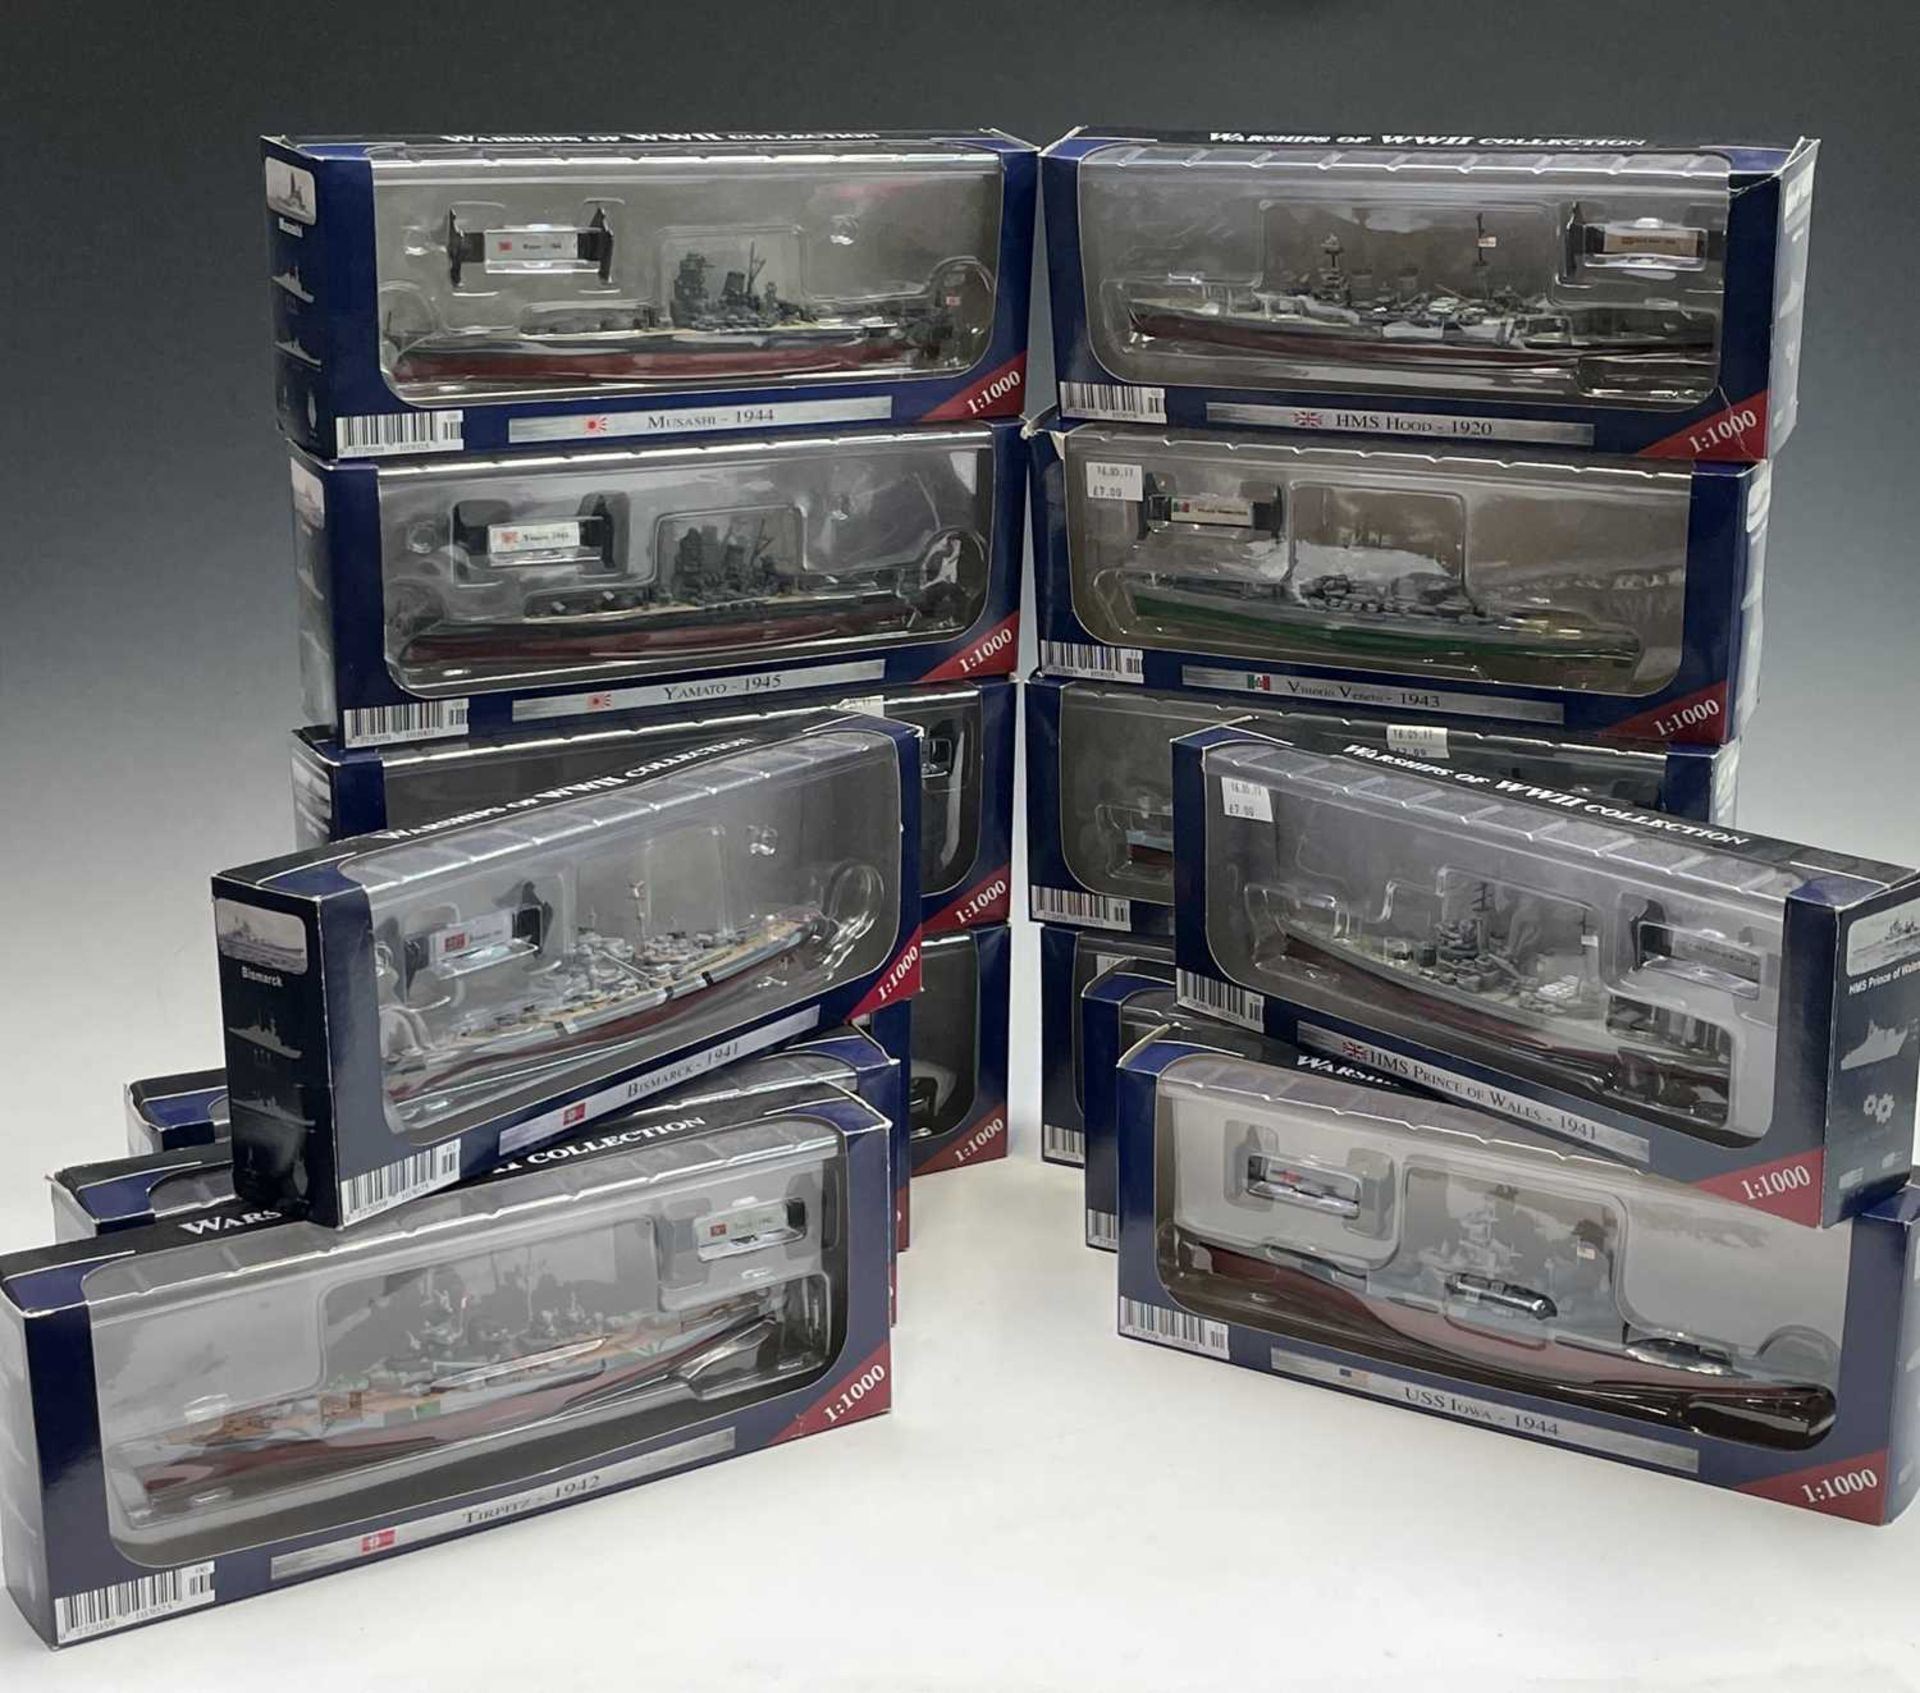 Military - Second World War Naval Craft. 3 boxes containing 15 boxed "Warship of WWII Collection"